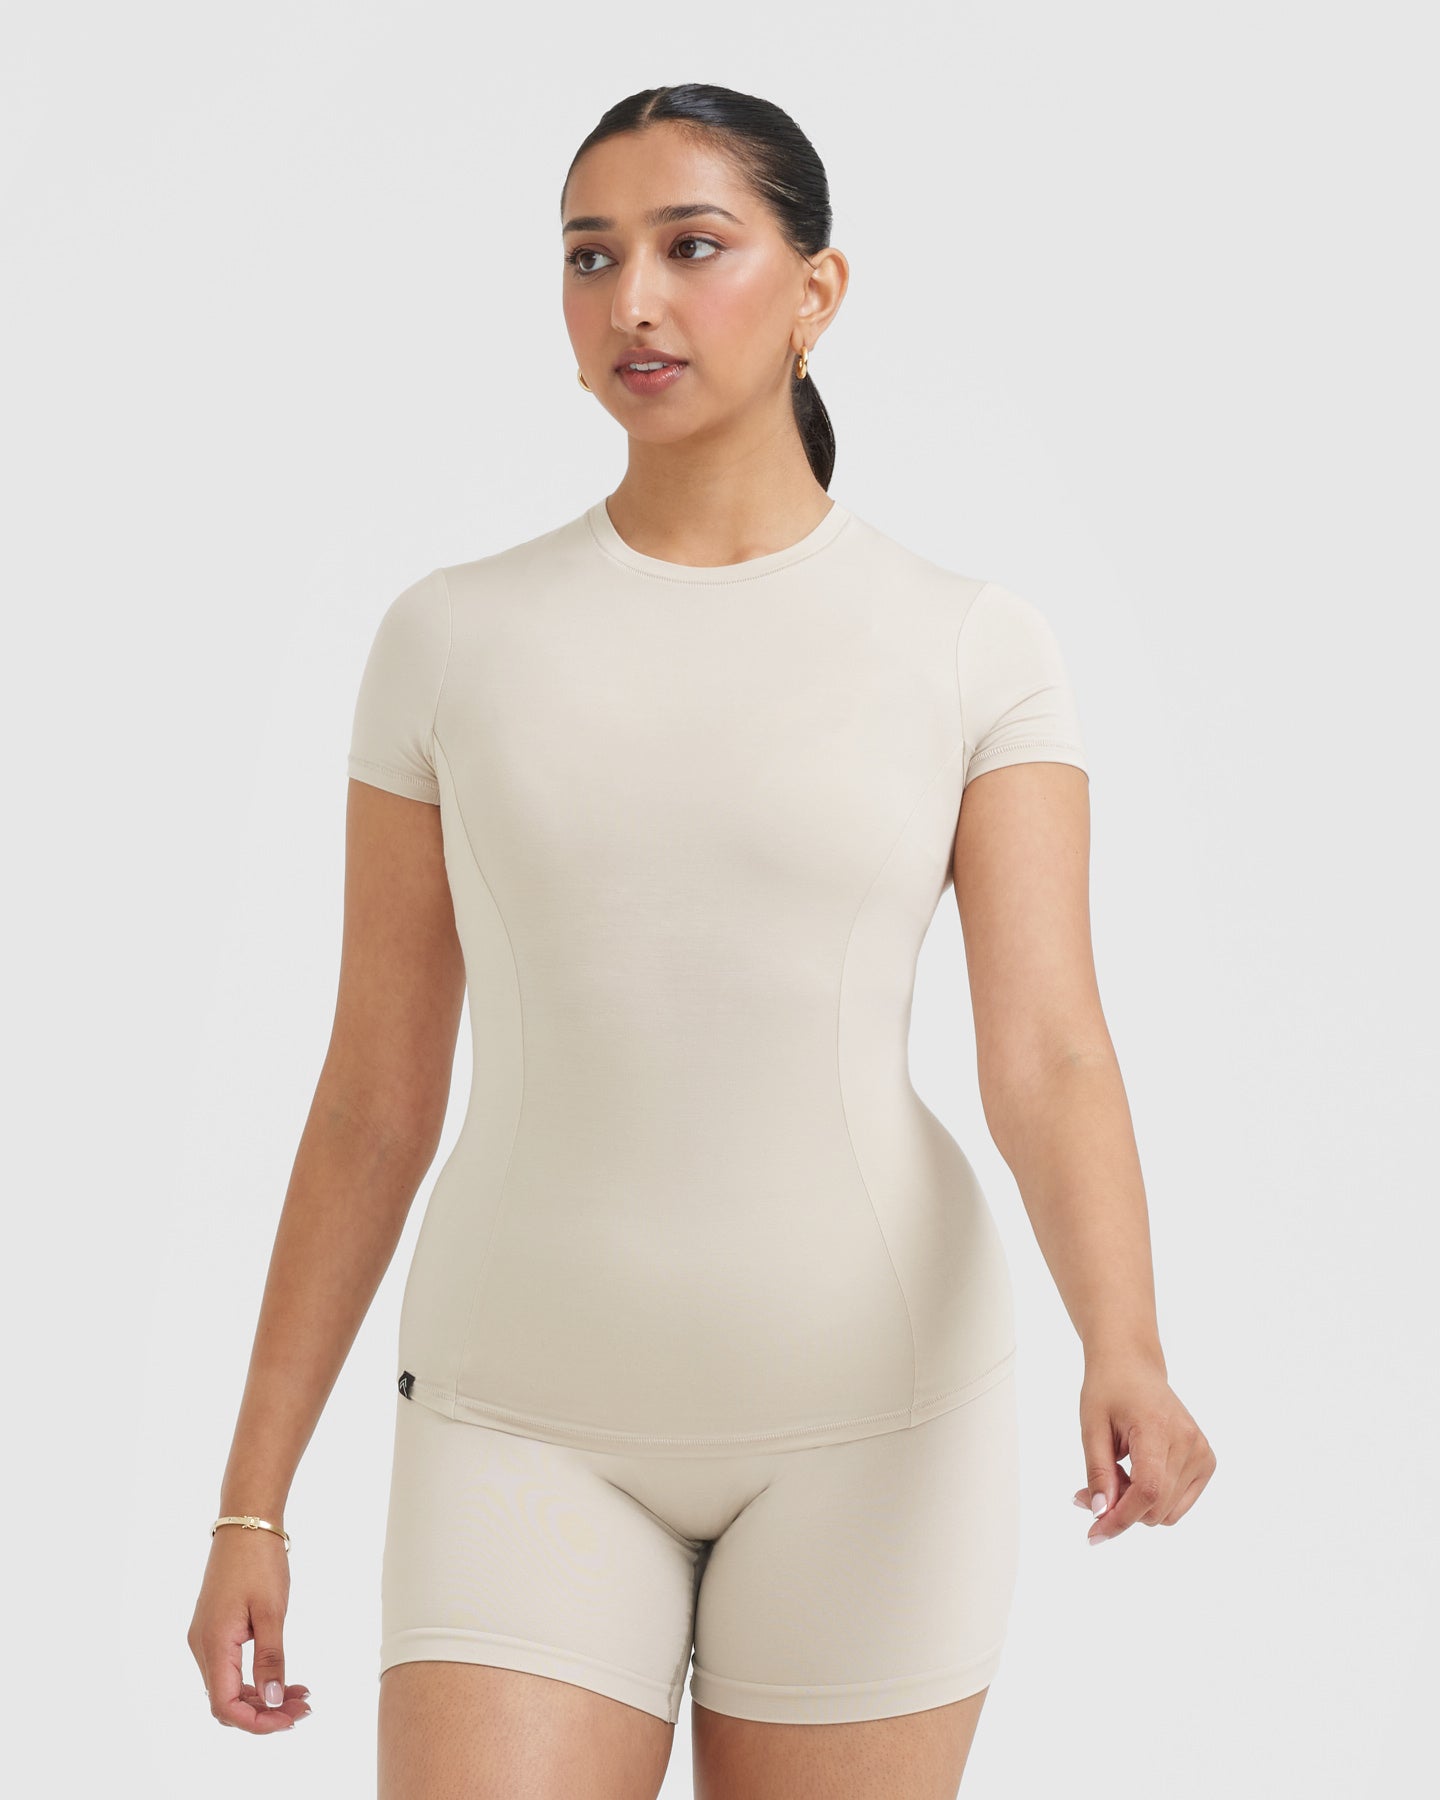 Fitted Short Sleeve Top Women's - Sand | Oner Active US